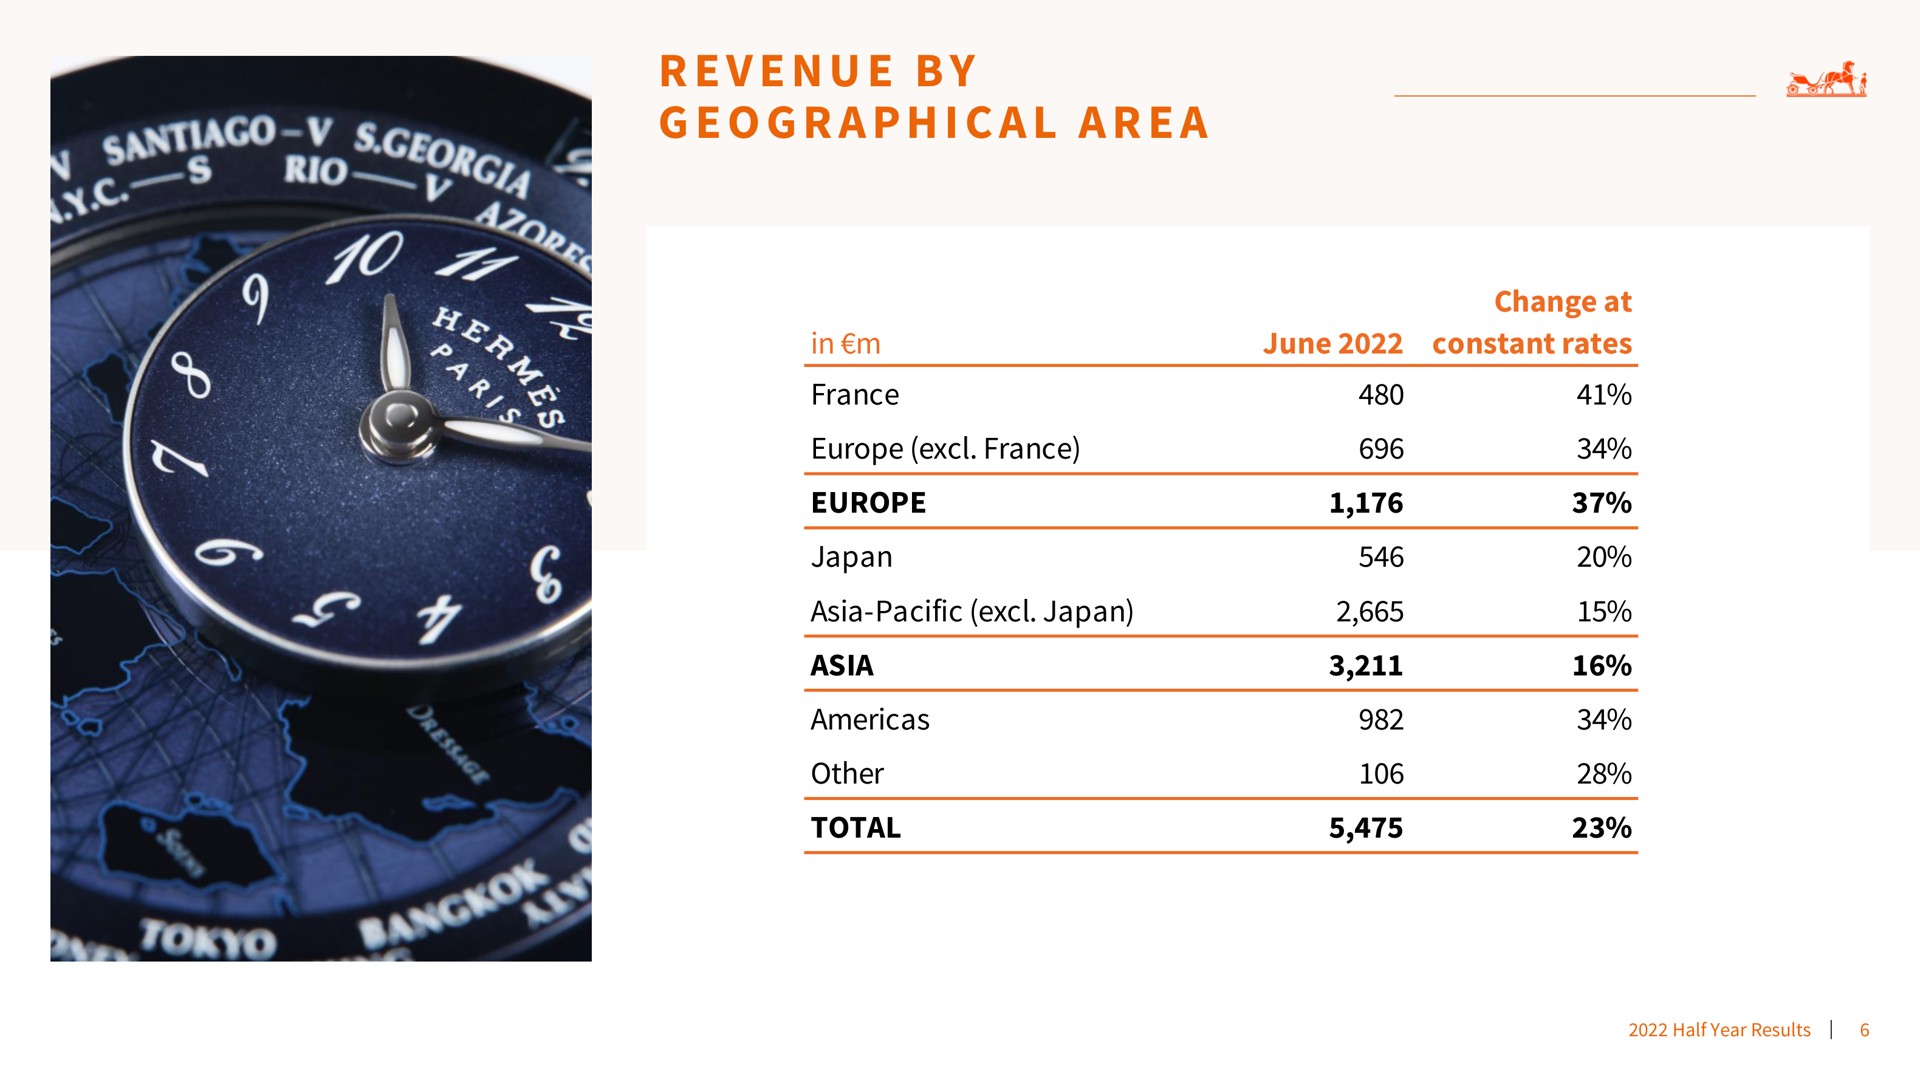 a i a a a revenue by geographical area | Hermes